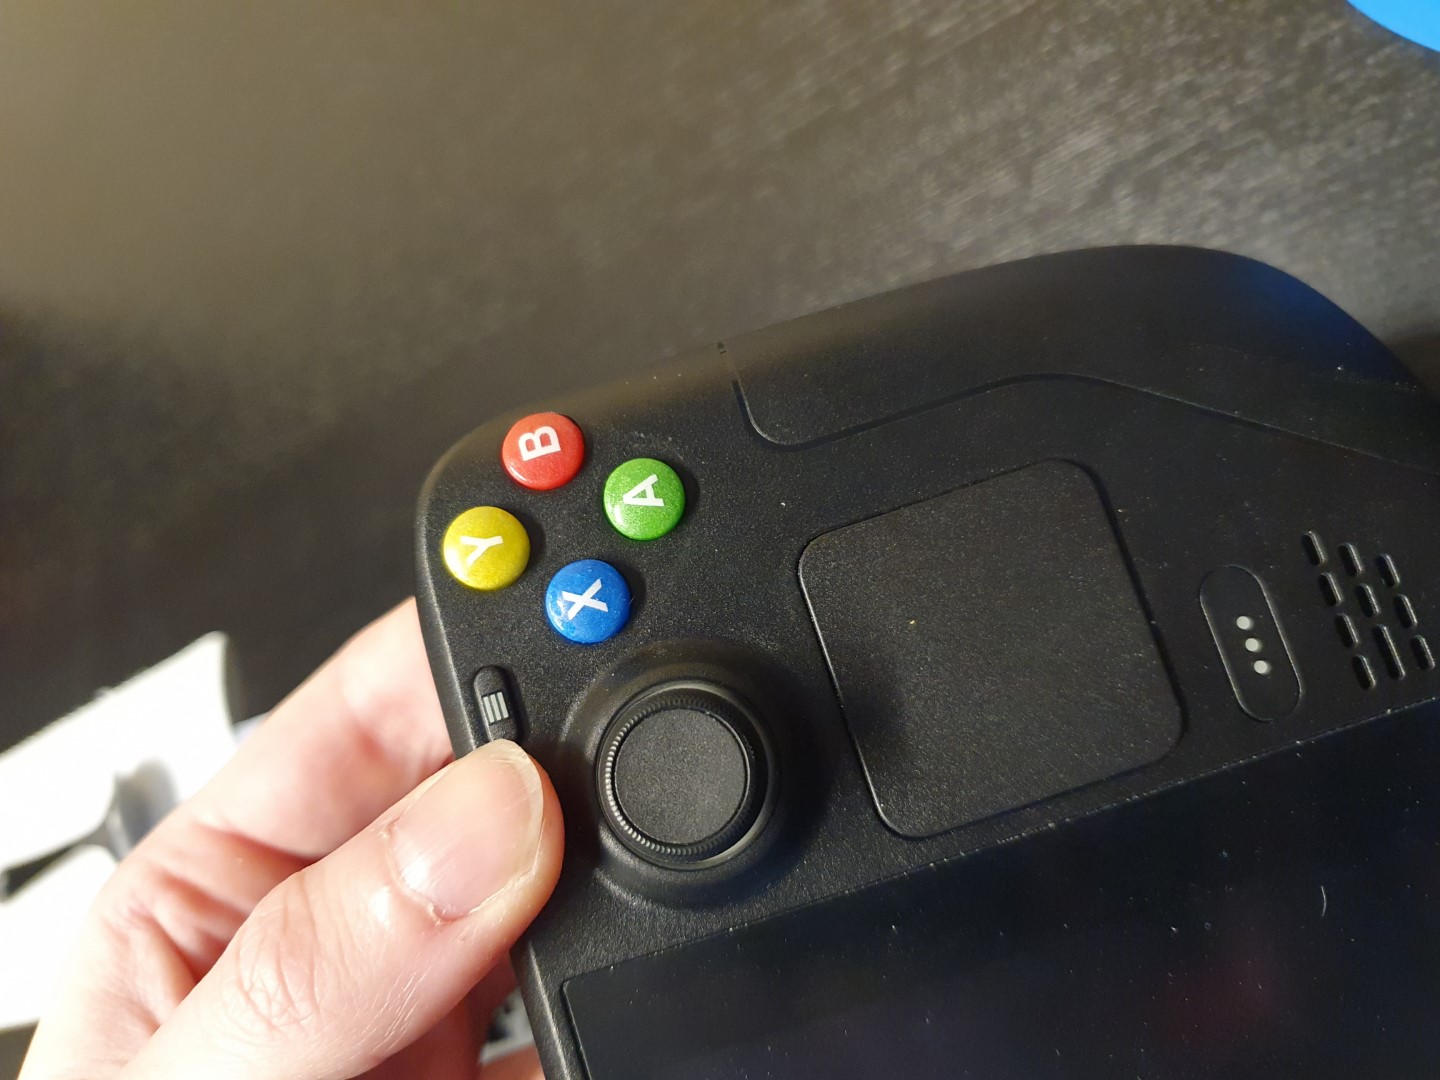 Colorful custom action buttons on the right side of a SteamDeck held up to the camera.